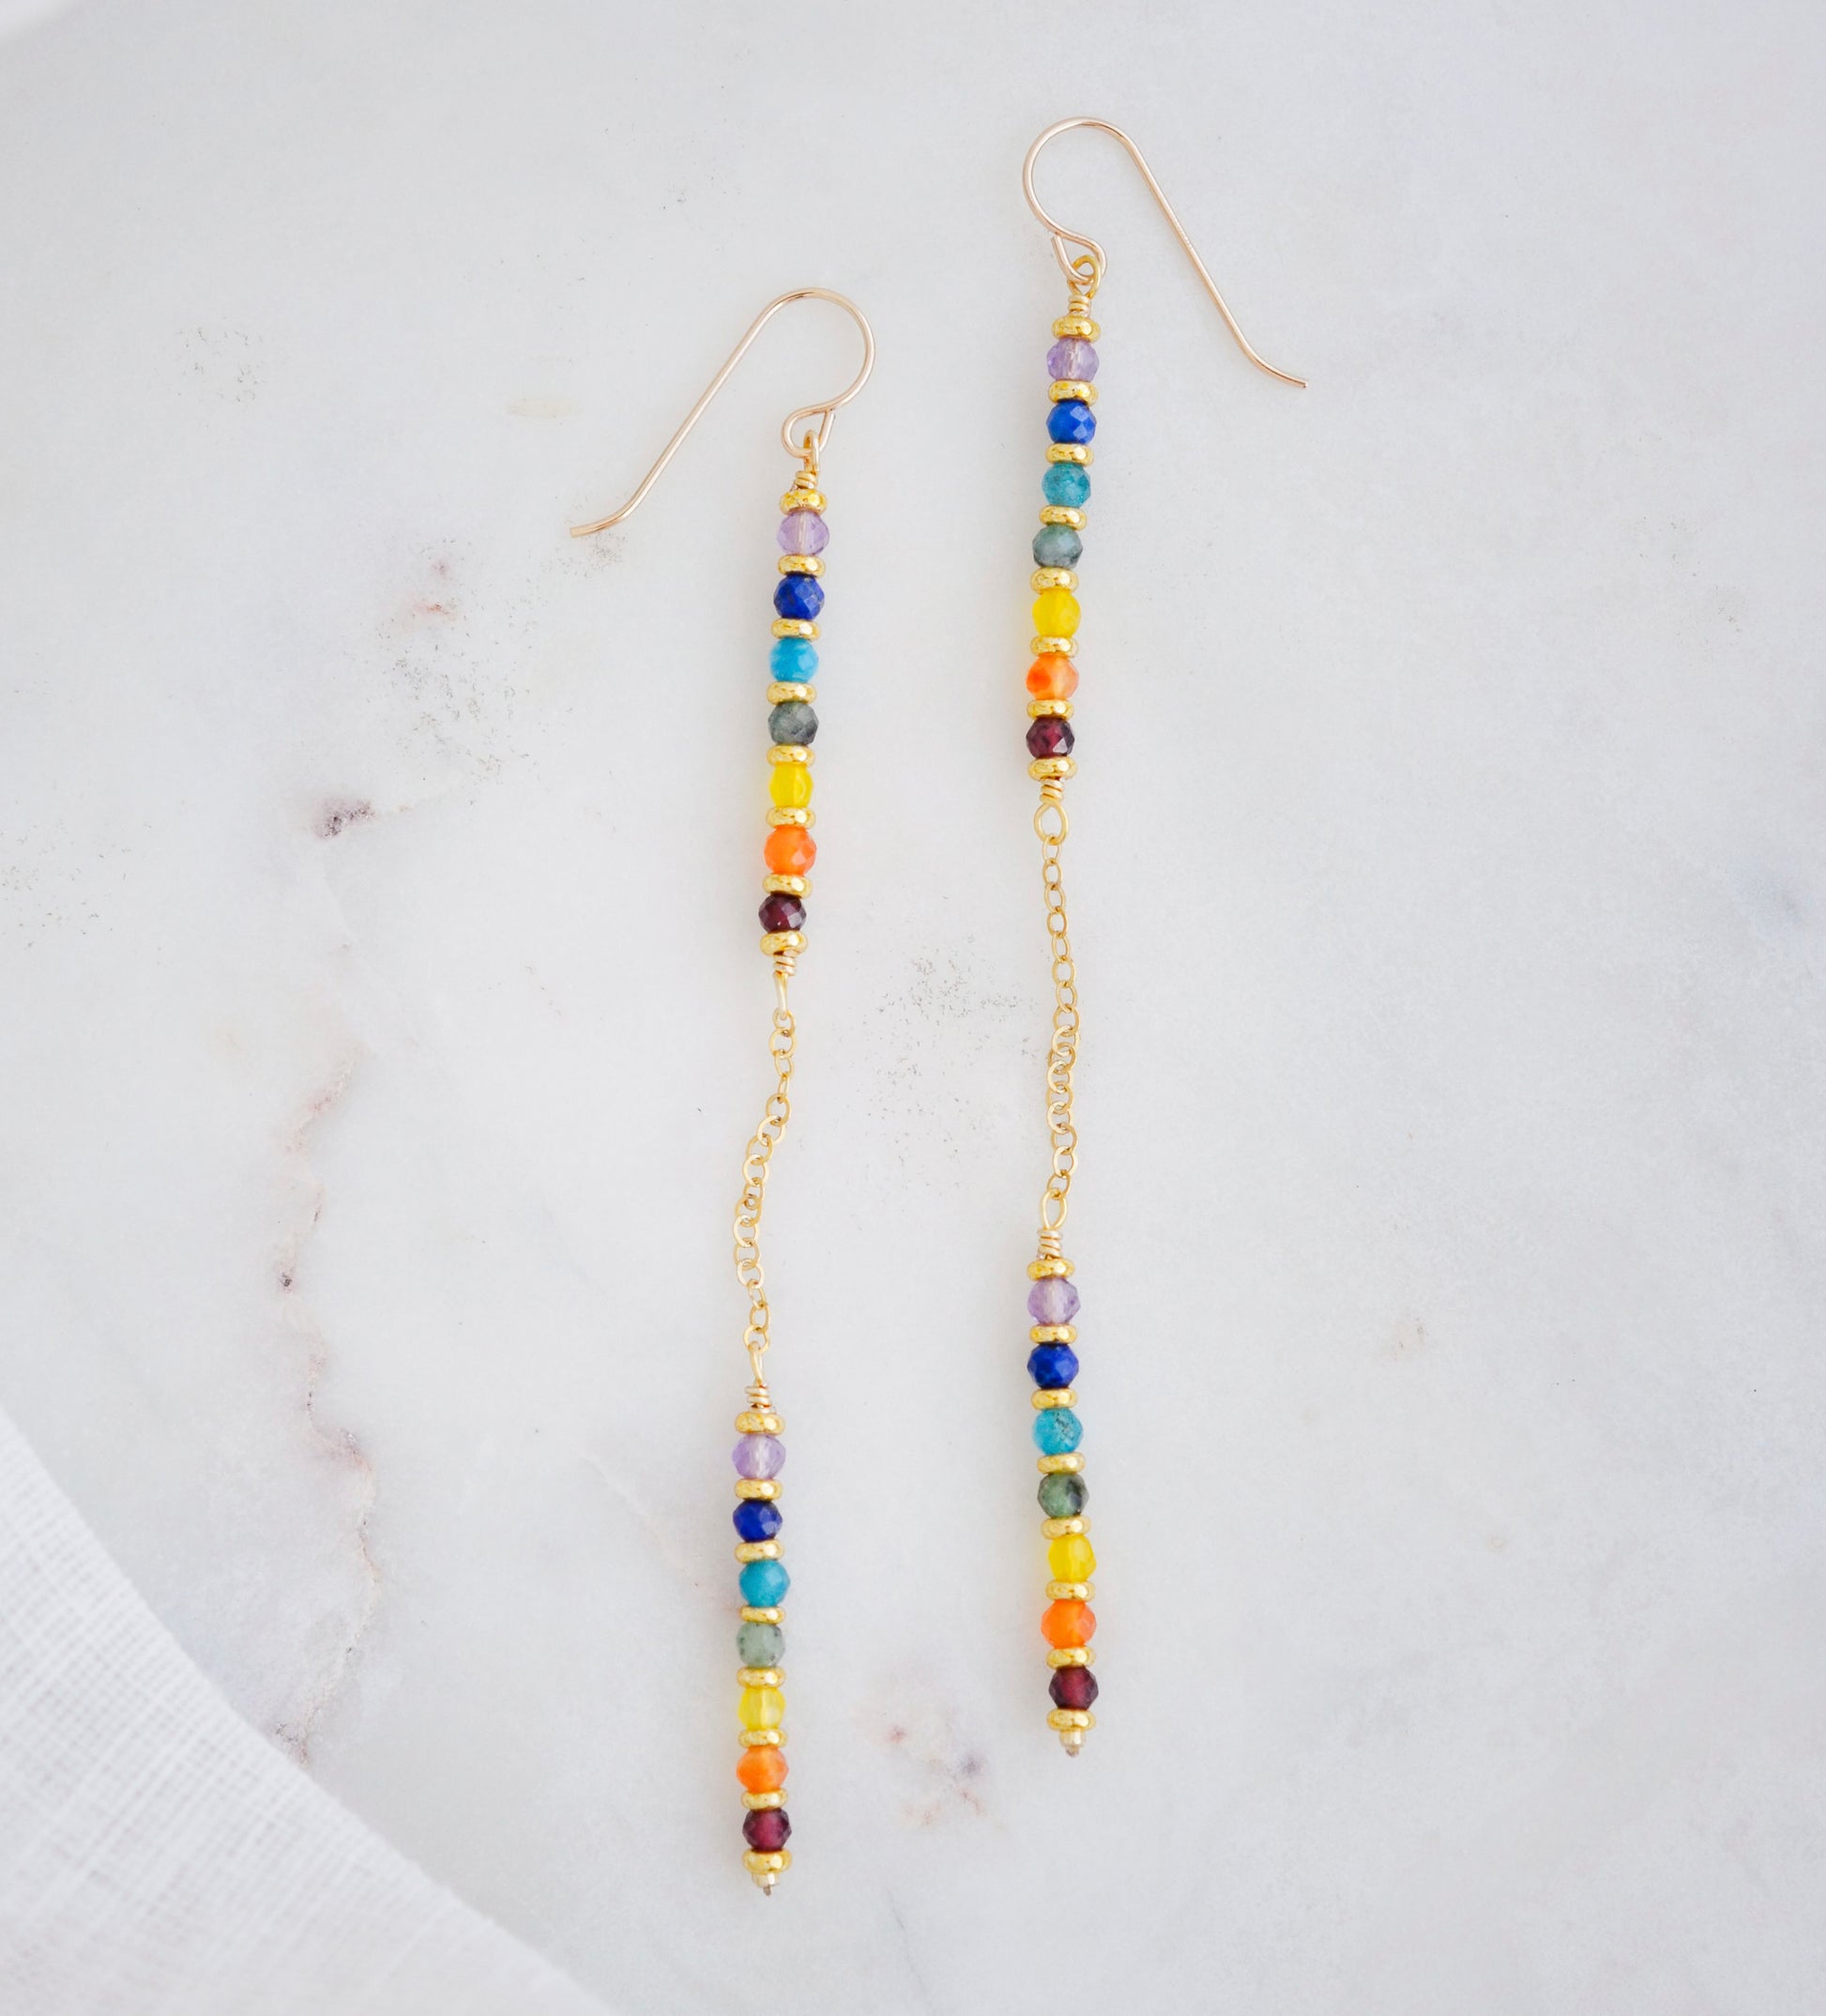 Two long, straight bars of crystals arranged in a rainbow pattern separated by a dainty chain. The gold style is shown showing the flexible chain.